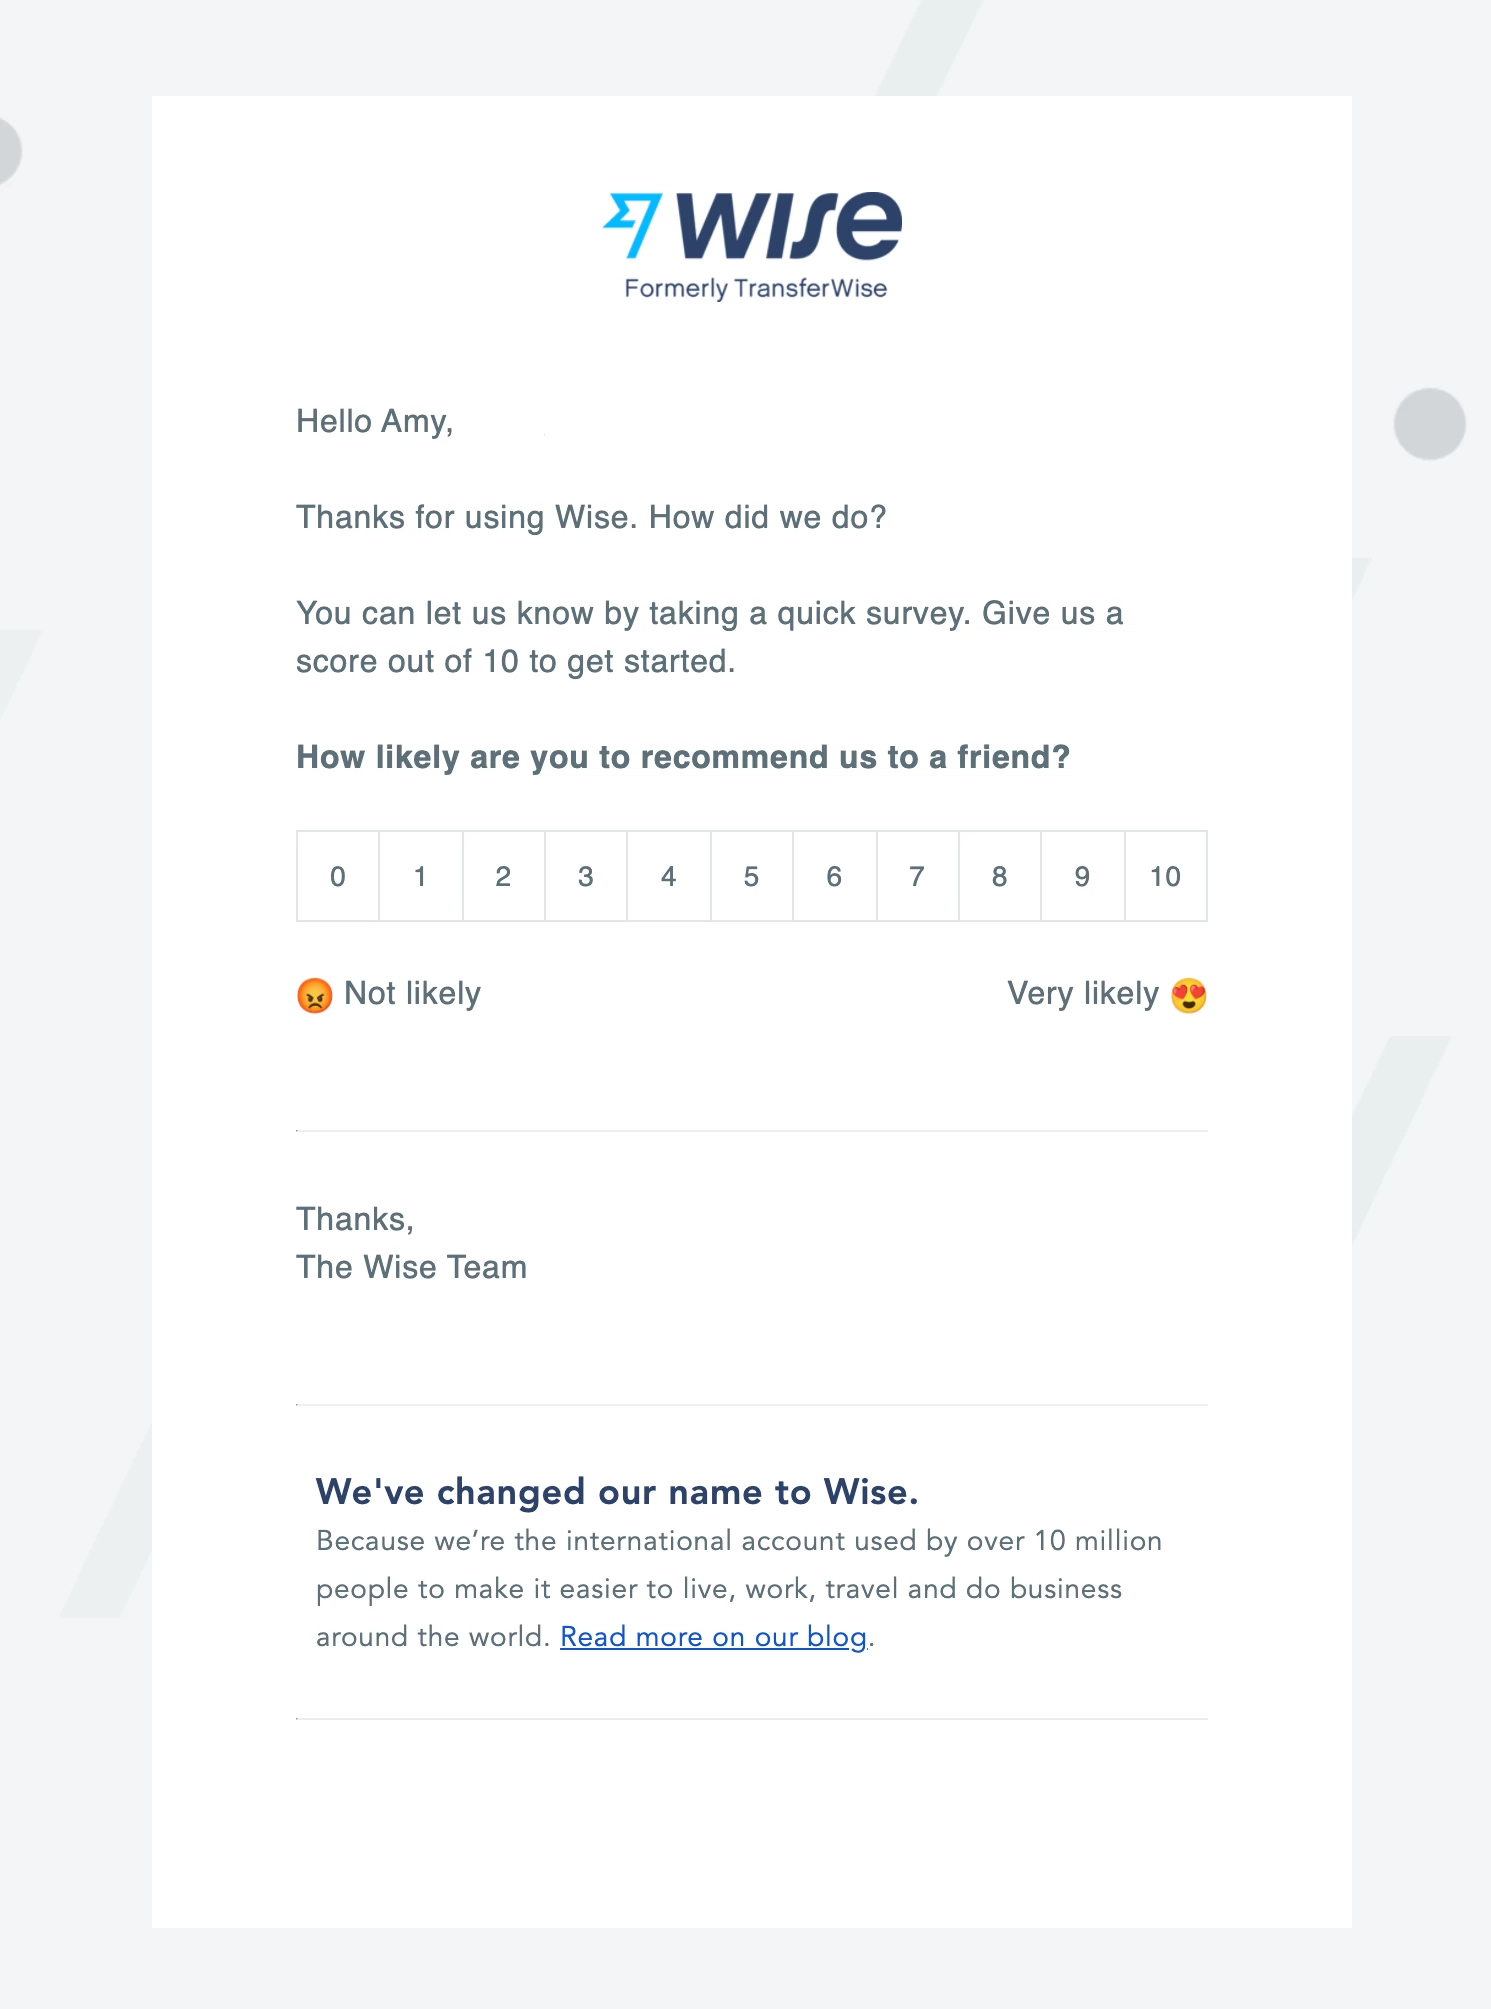 Wise interactive email example with NPS feedback scale